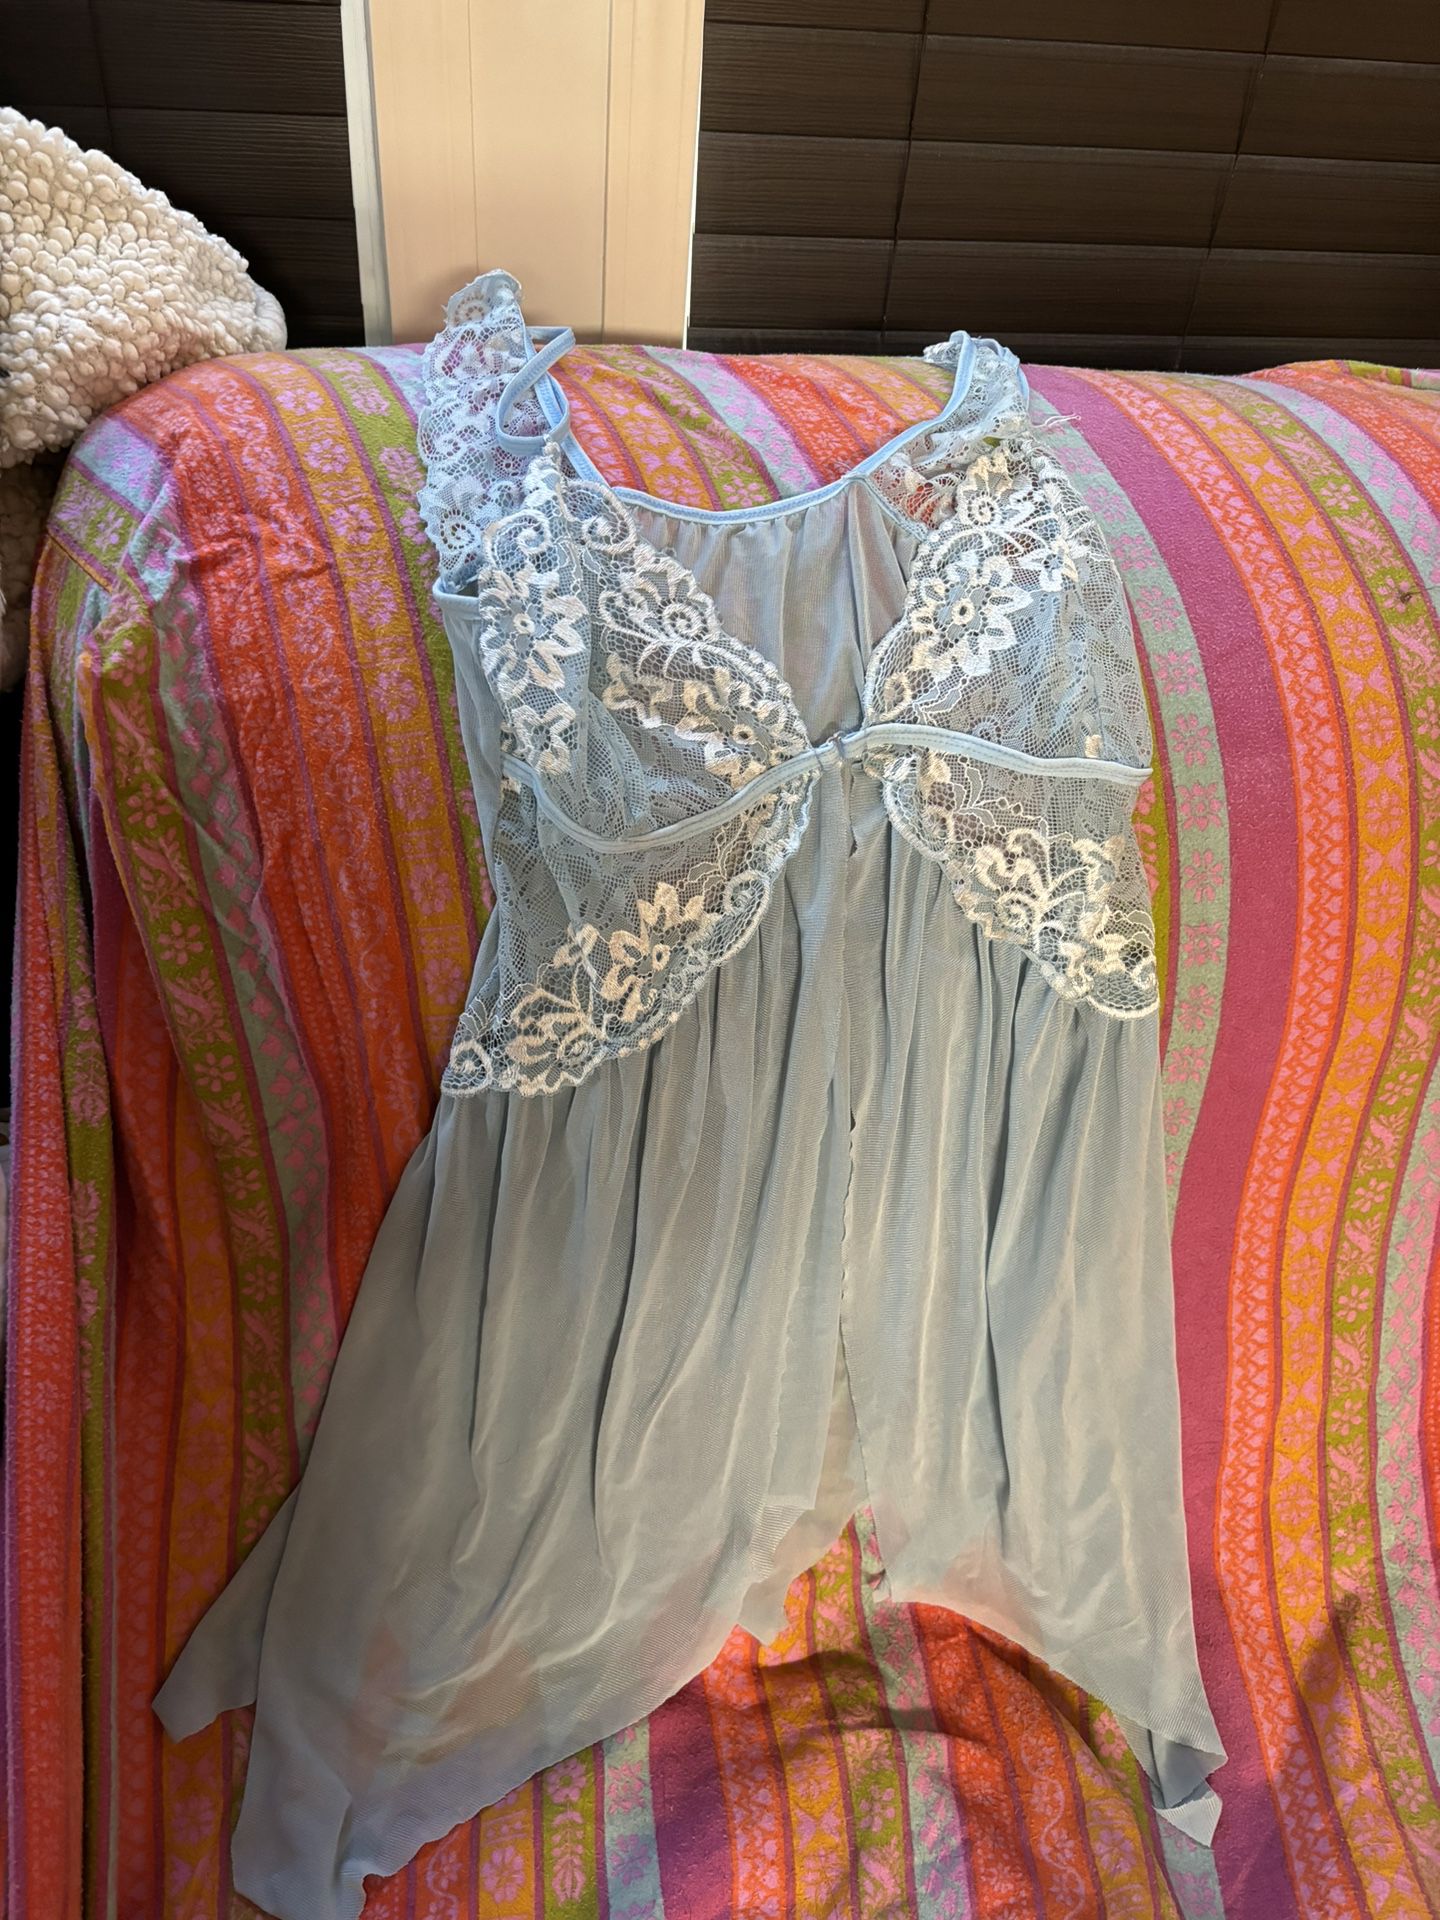 Nightie/ Lingerie / Nightgown/ Baby Doll Powder Blue Sexy Size M-L